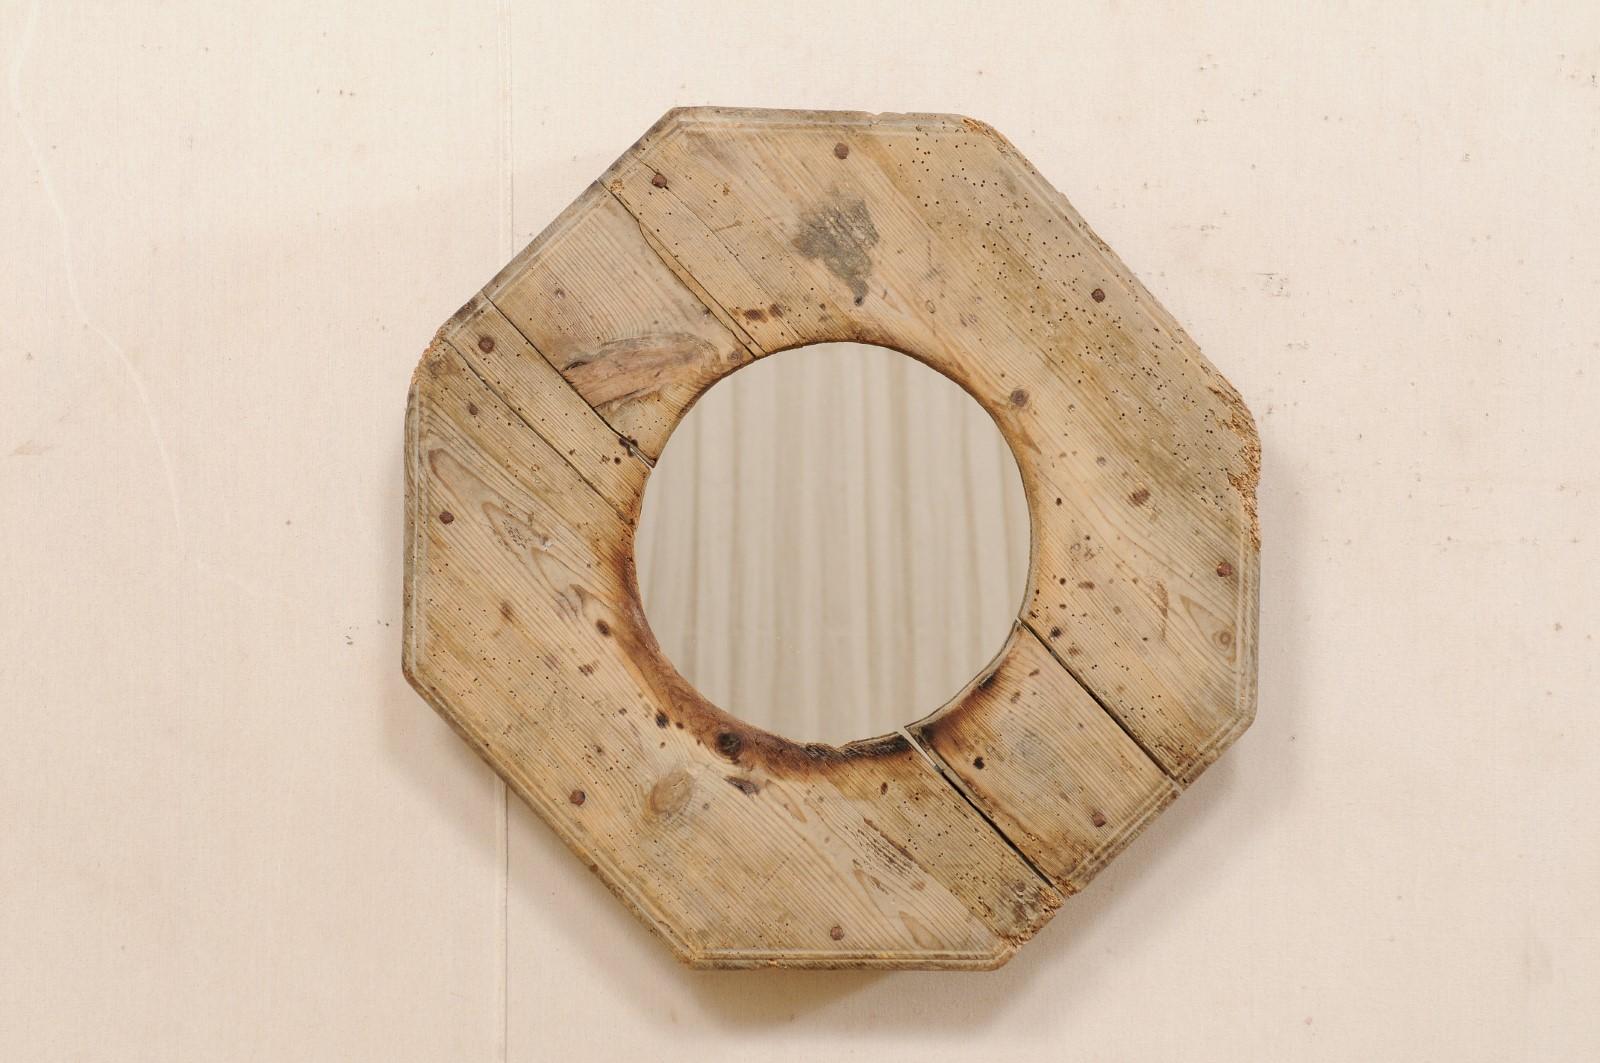 This unique mirror has been custom fashioned with an old N. African wooden cooking utensil as the surround, with new mirrored glass in it's center. This mirror features a circular-shaped mirror, within a rustic and octagonal-shaped wooden frame from